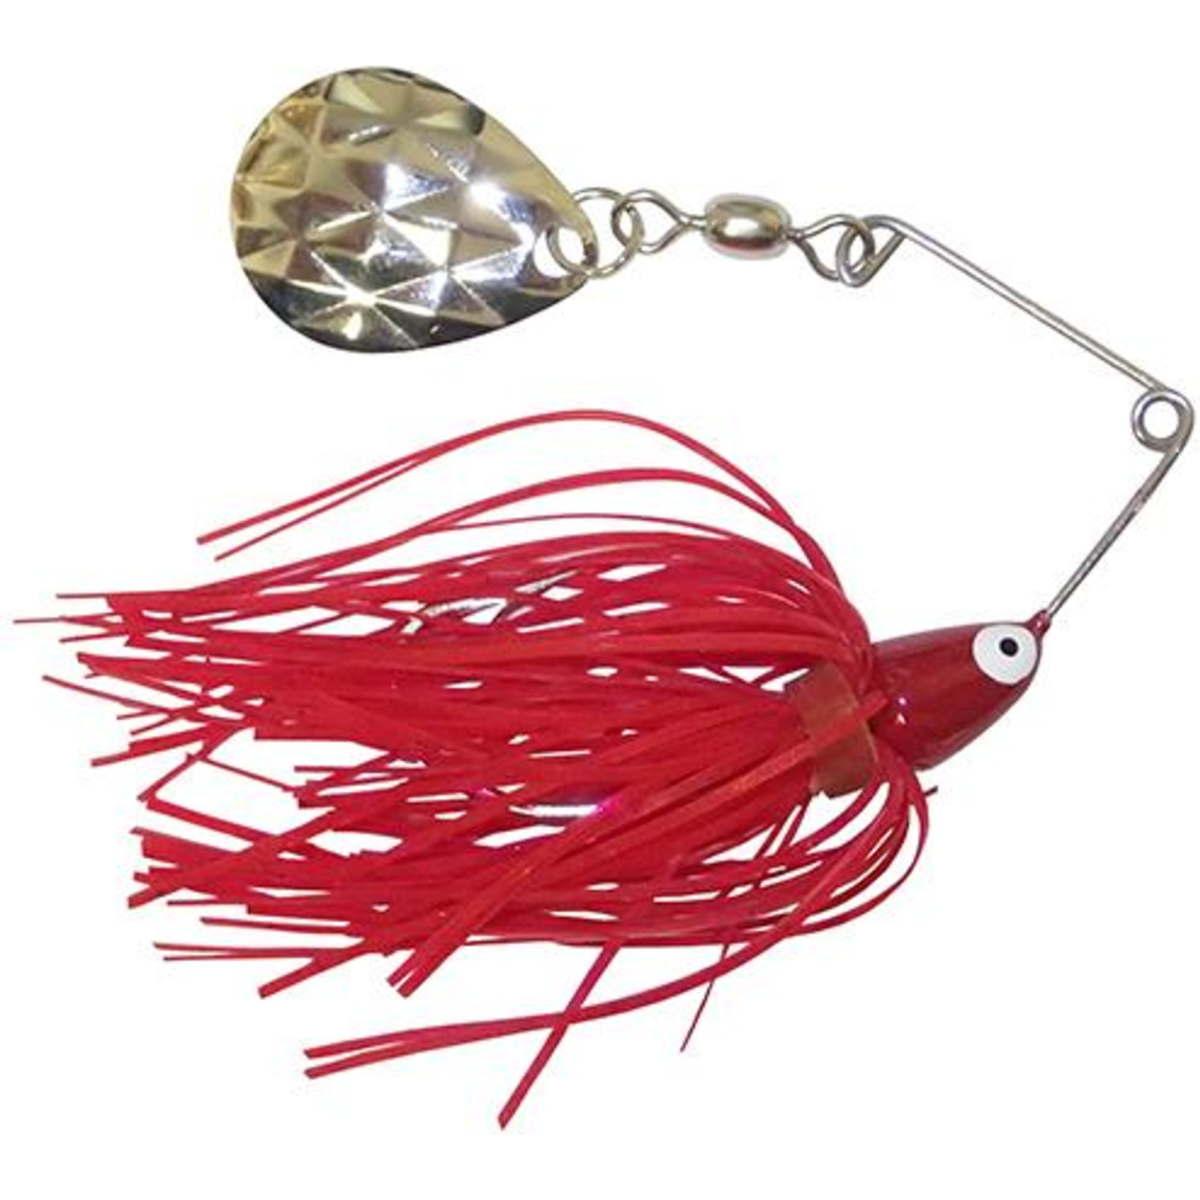 Photo of Strike King Mini-King Spinnerbait - 1/8 oz. for sale at United Tackle Shops.